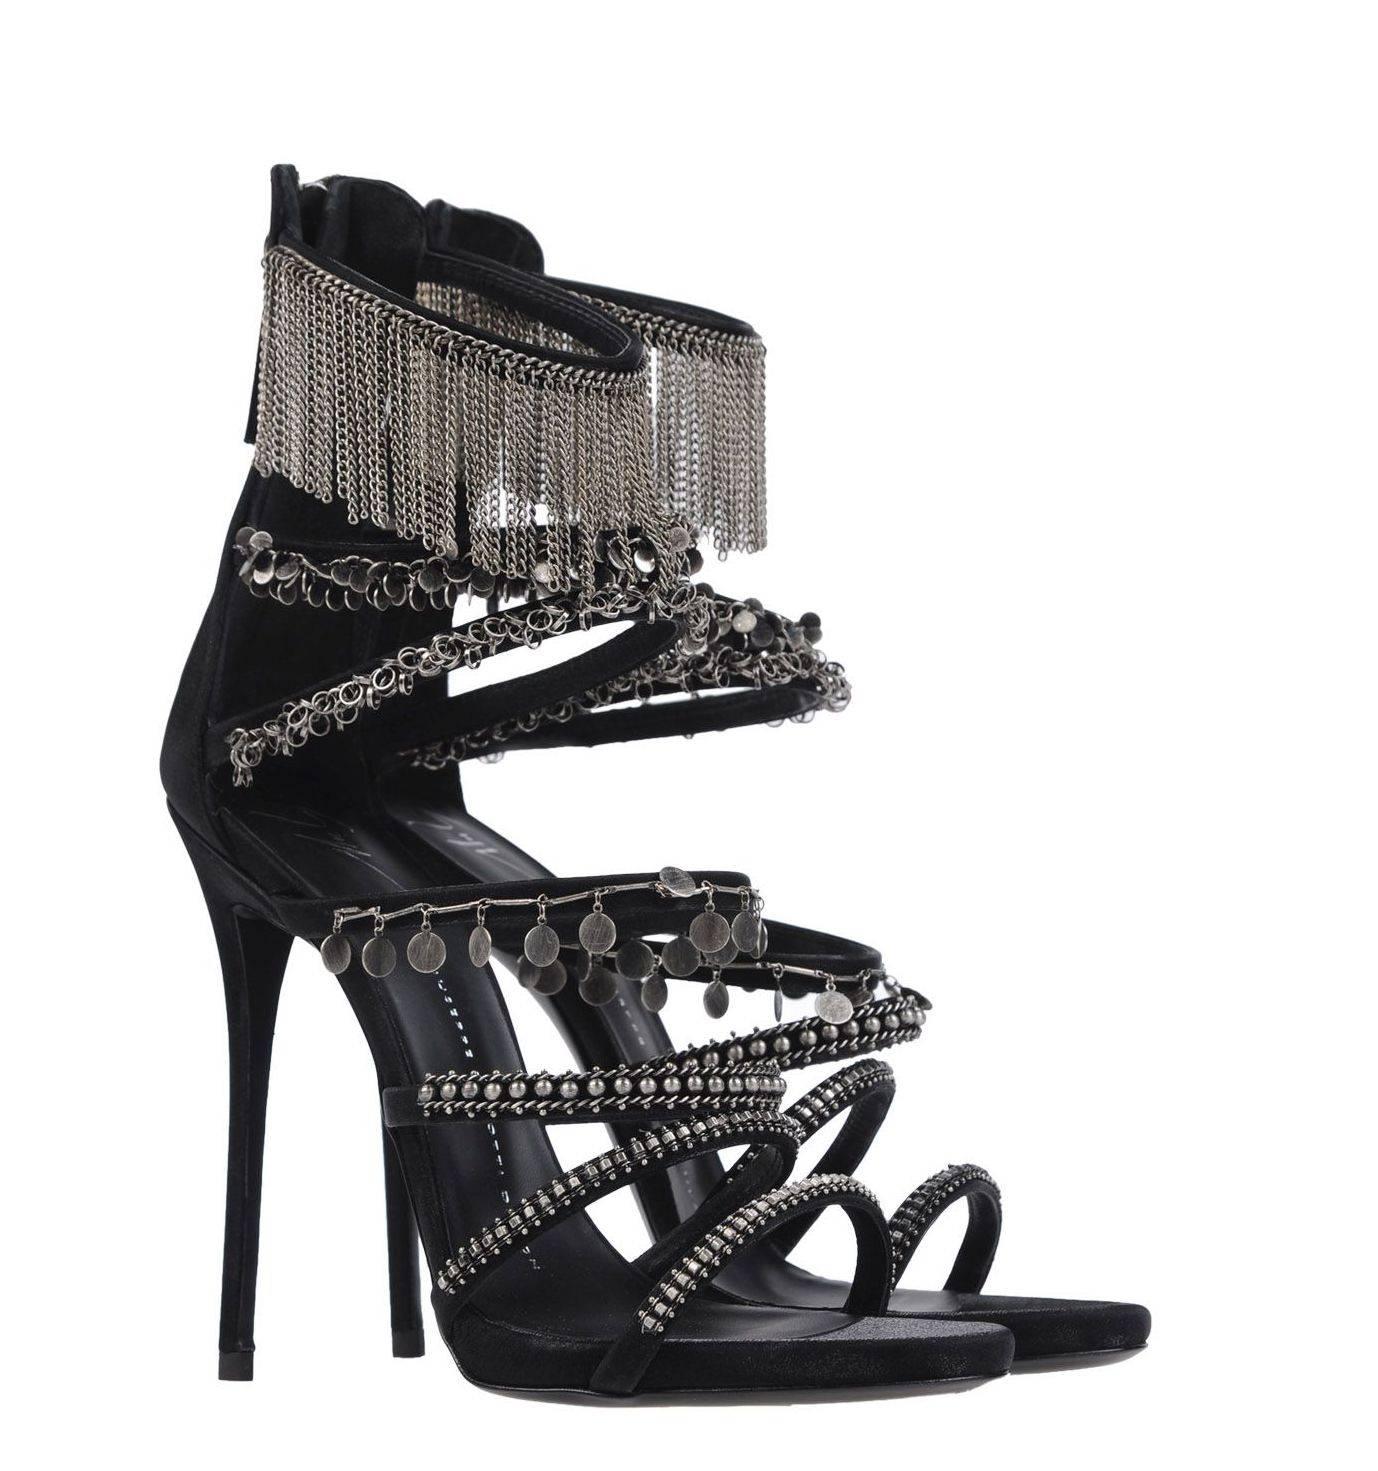 Giuseppe Zanotti New Sold Out Black Suede Silver Coin Chain Heels Sandals in Box  

Size IT 36
Suede 
Silver tone metal
Zipper back closure 
Made in Italy
Heel height 4.75